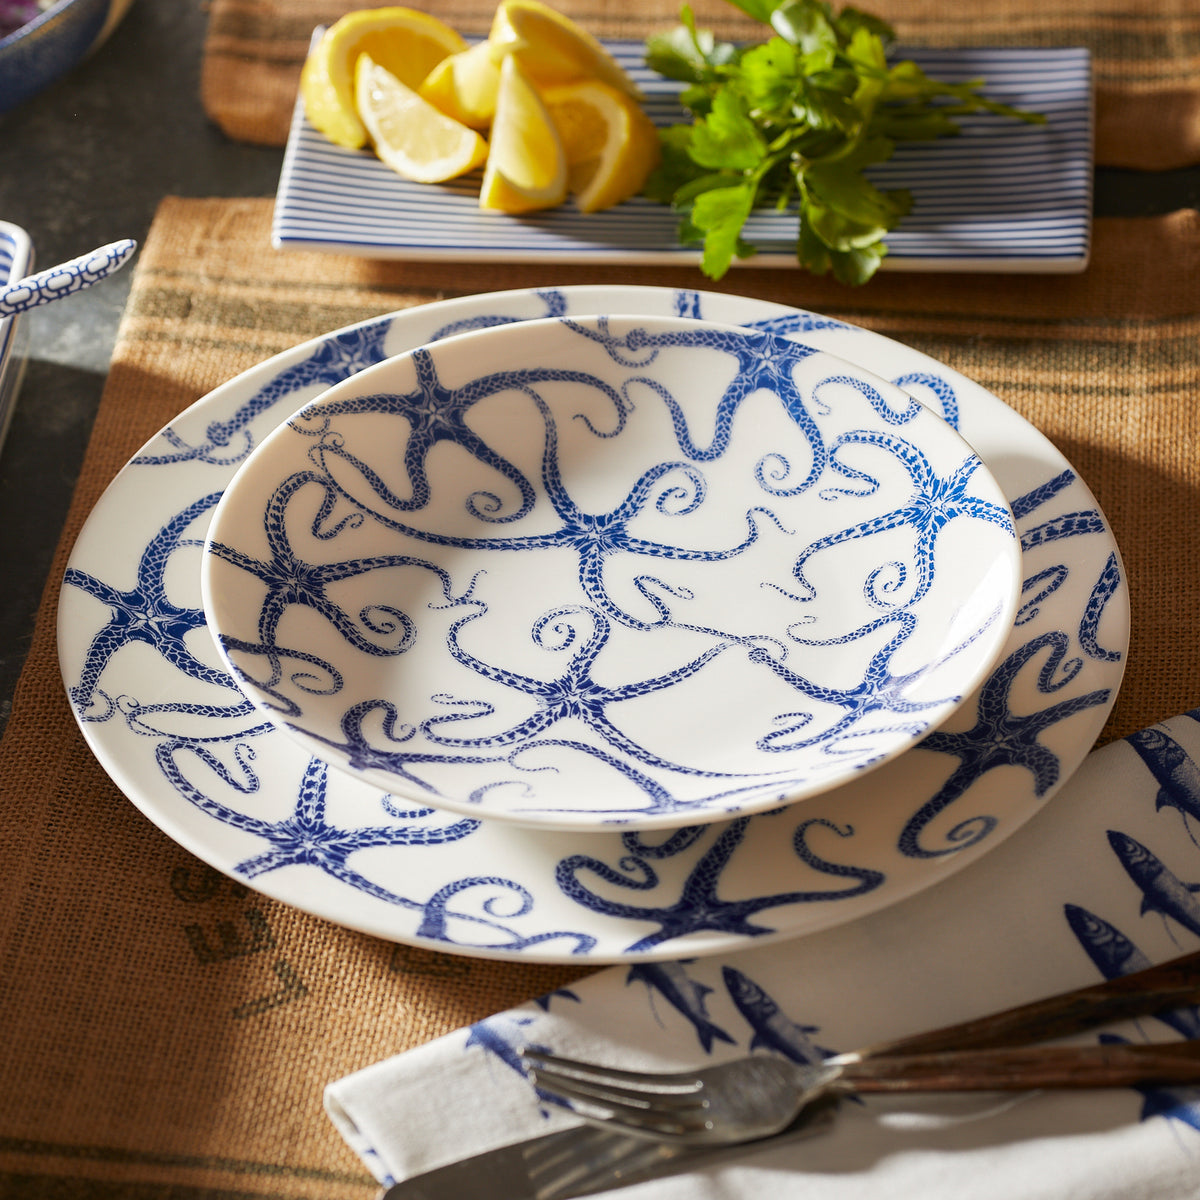 Set of blue and white starfish-patterned dishes on a burlap placemat with a fork and knife on a napkin. A Caskata Artisanal Home Starfish Coupe Salad Plate in the background holds lemon wedges and fresh herbs.